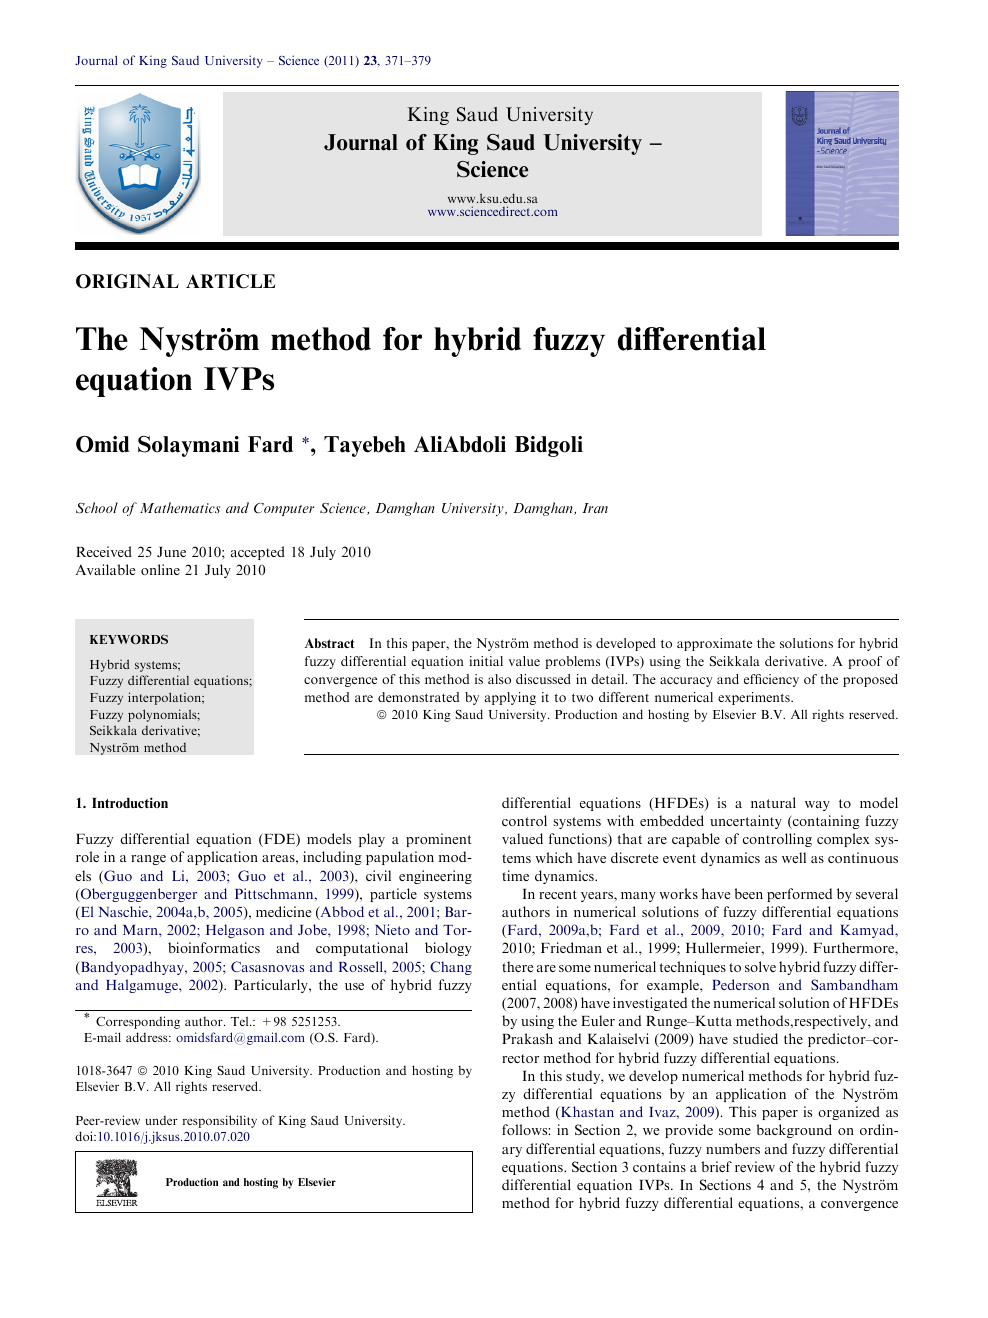 The Nystrom Method For Hybrid Fuzzy Differential Equation Ivps Topic Of Research Paper In Mathematics Download Scholarly Article Pdf And Read For Free On Cyberleninka Open Science Hub